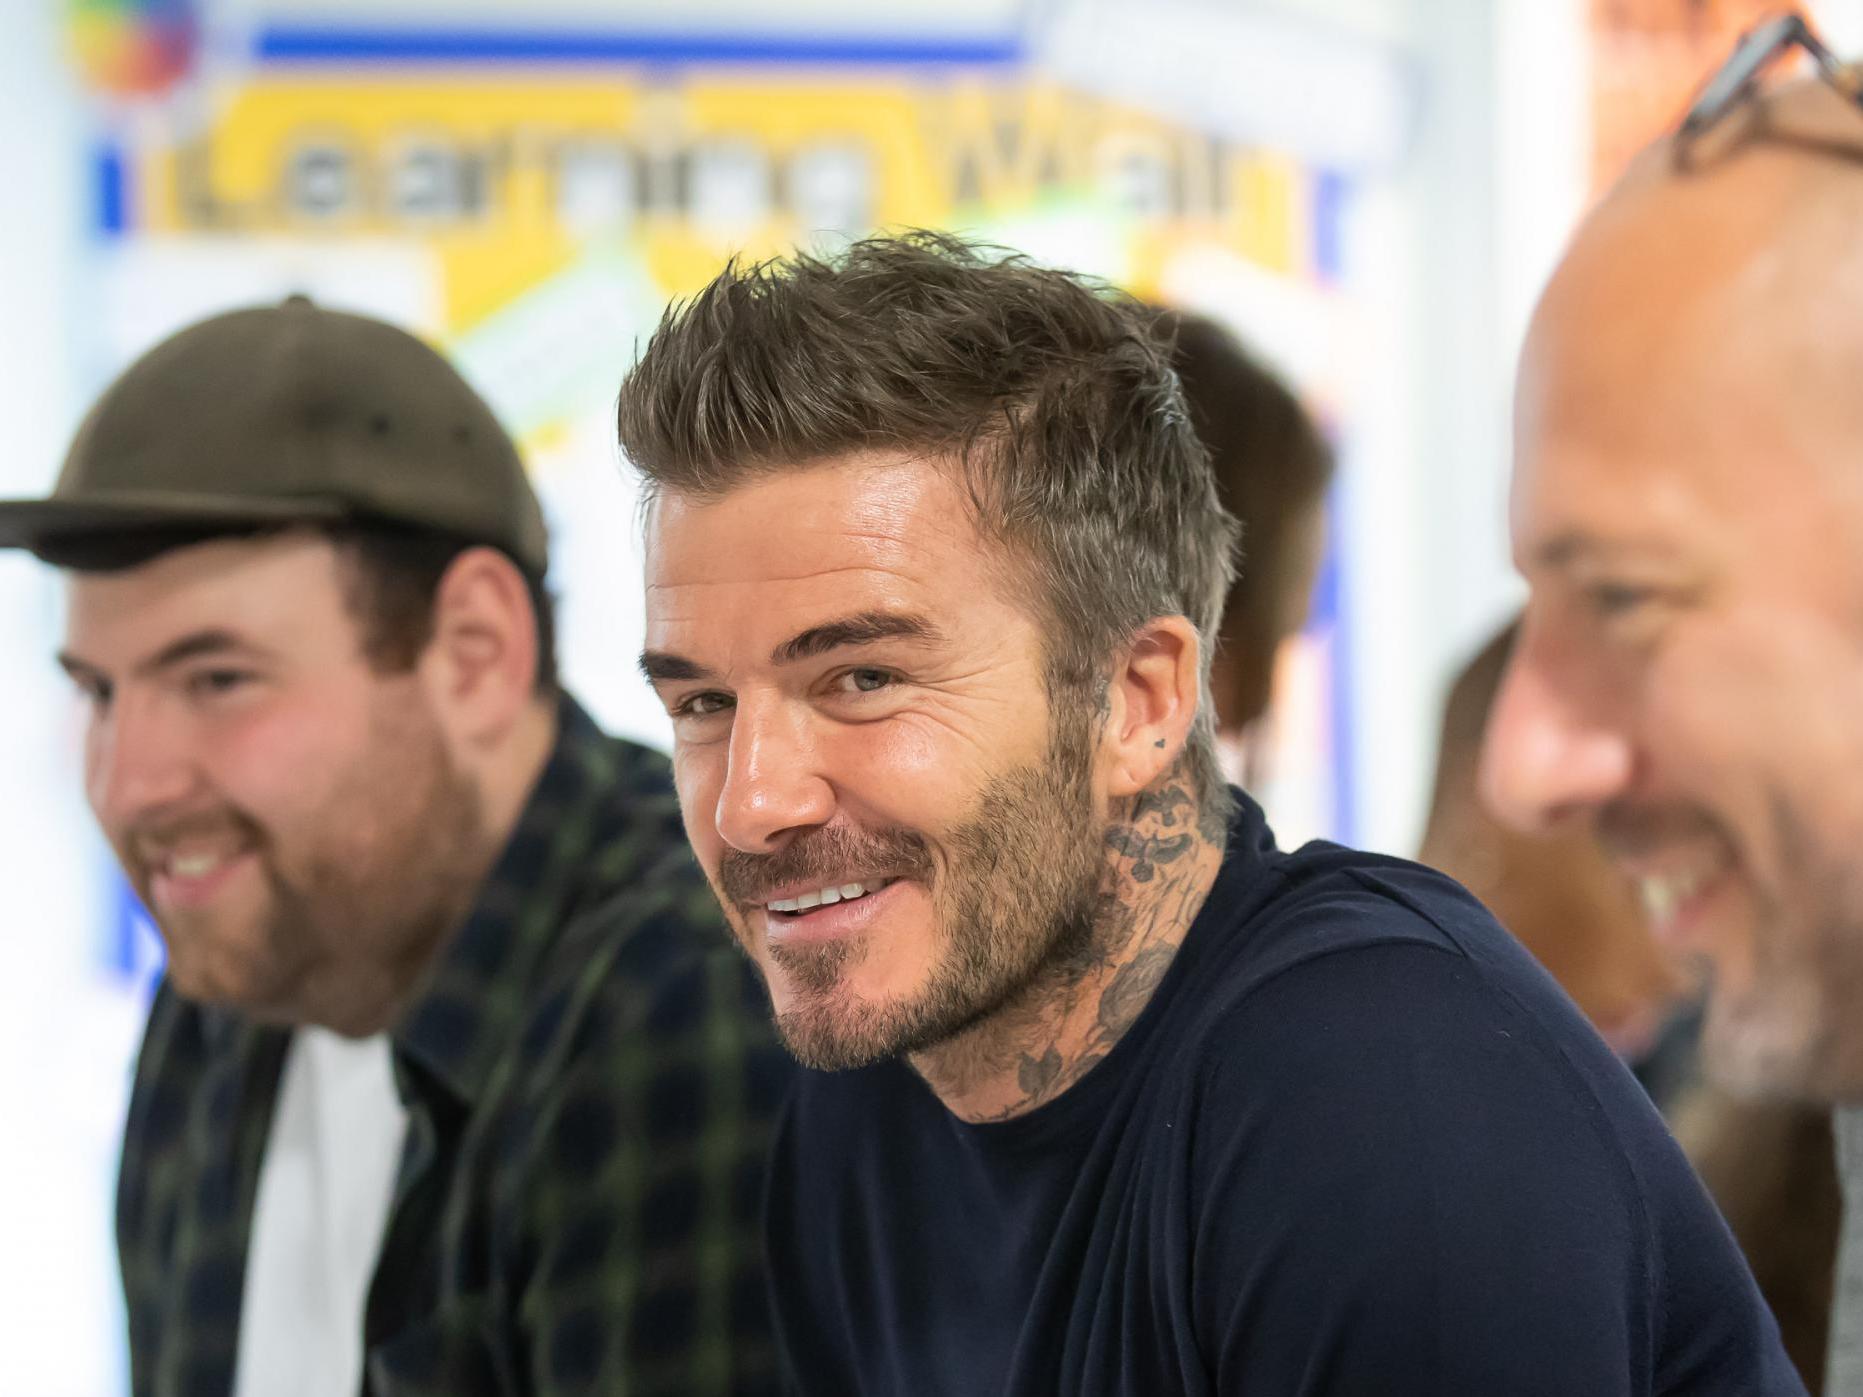 David Beckham has run into problems launching his own MLS side